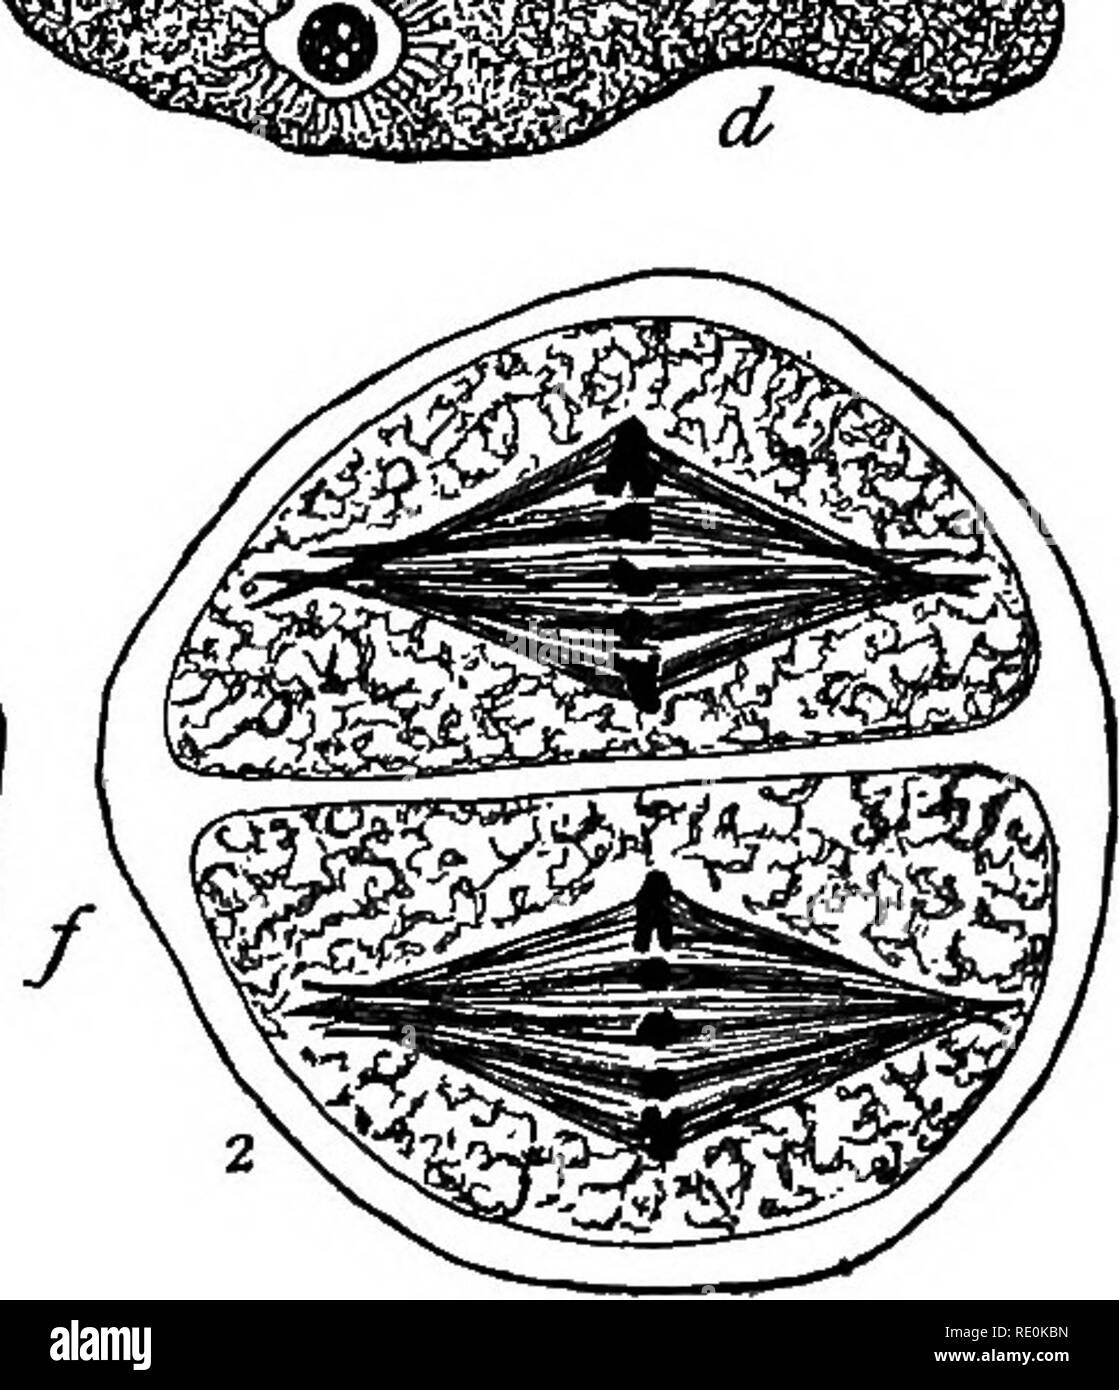 . Studies on the plant cell. pt.1-8. Plant cells and tissues. ' - -^ â / H â¢'â¢s x:^ â ''??. Fig. 5.â Metapliases of Mito'sis. Â«, Saprolegnia; intranuclear spindle in oogonium, nucle- olus outside of spindle. ^, Erysiphe ; mitosis in ascus, asters with rather small centro- spheres. c, Corallina; first mitosis in tetraspore mother-cell, very large and well differentiated centrospheres. rf, Zamia; blunt poled intranuclear spindle in central cell of pollen grain ; blepharoplasts, their outer membrane about to break up. c, Pellia; first mitosis in spore mother-cell; broad spindle with rounded po Stock Photo